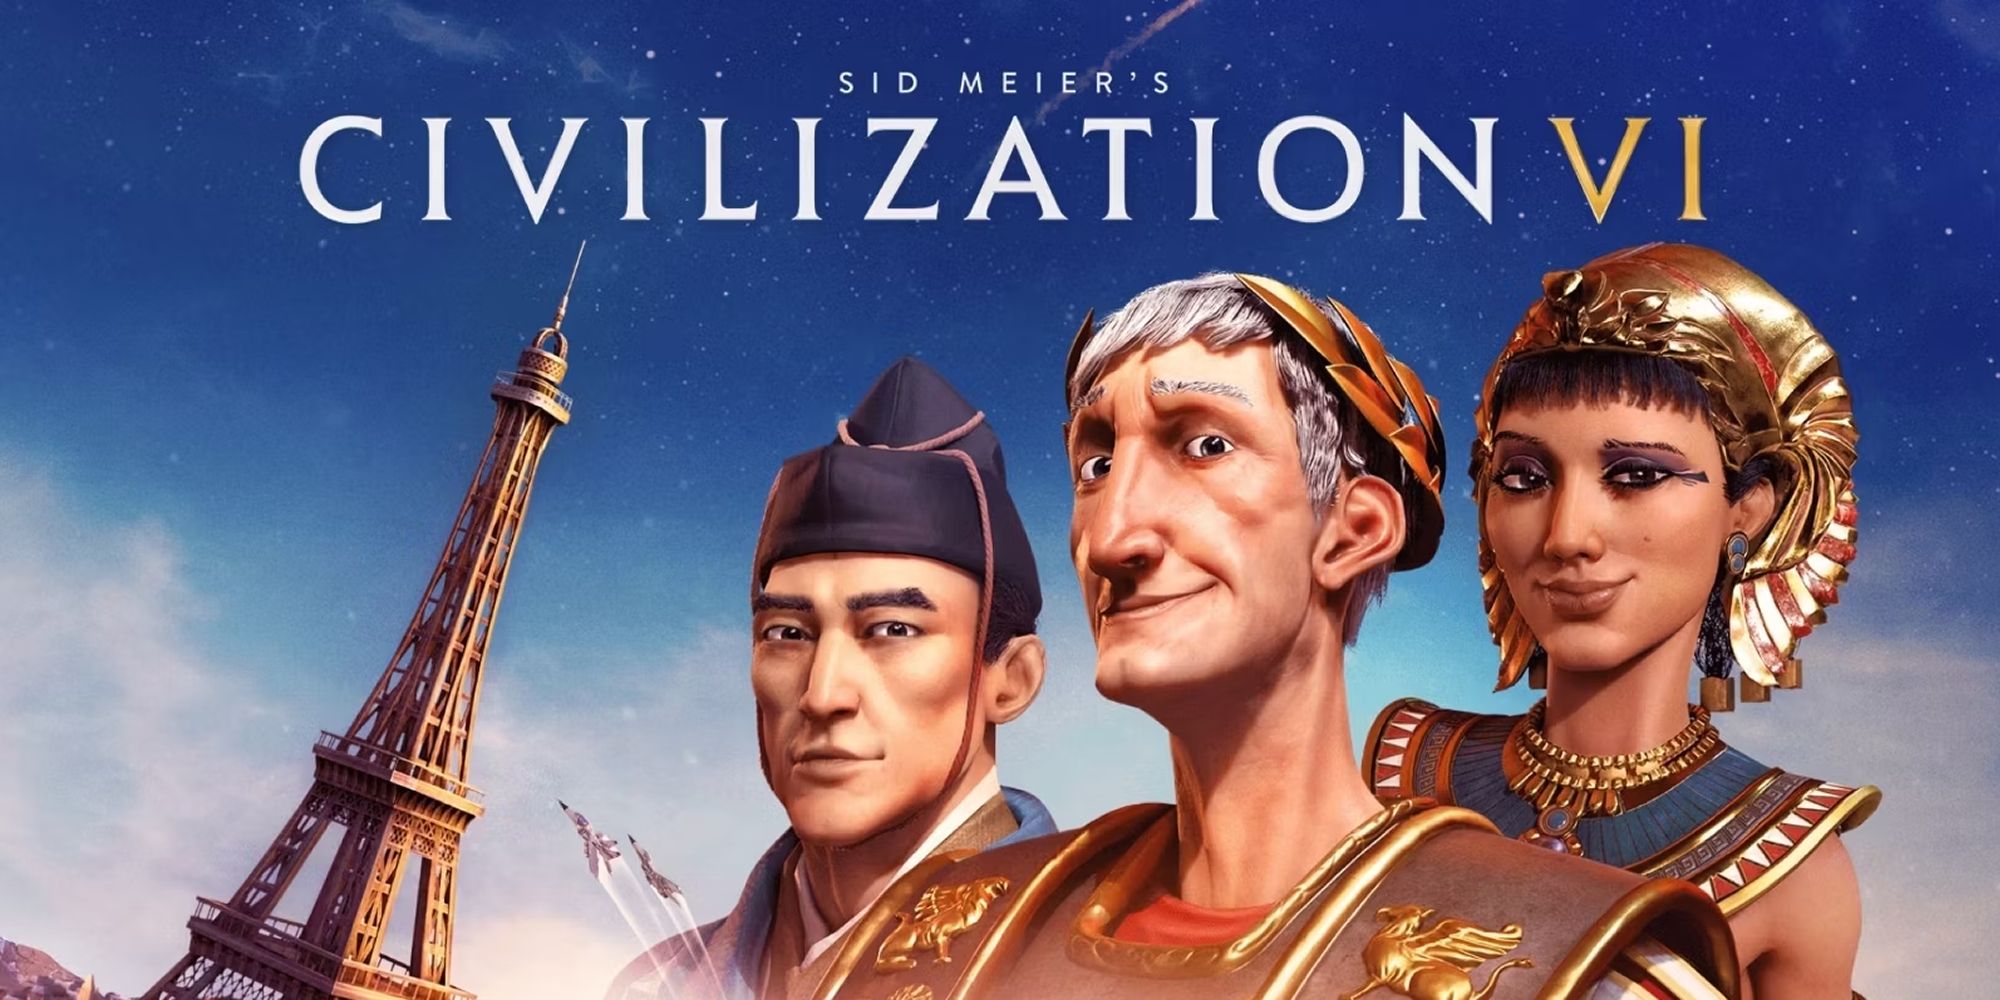 Civilization6 With Historical Leaders, Jets, And The Eiffel Tower